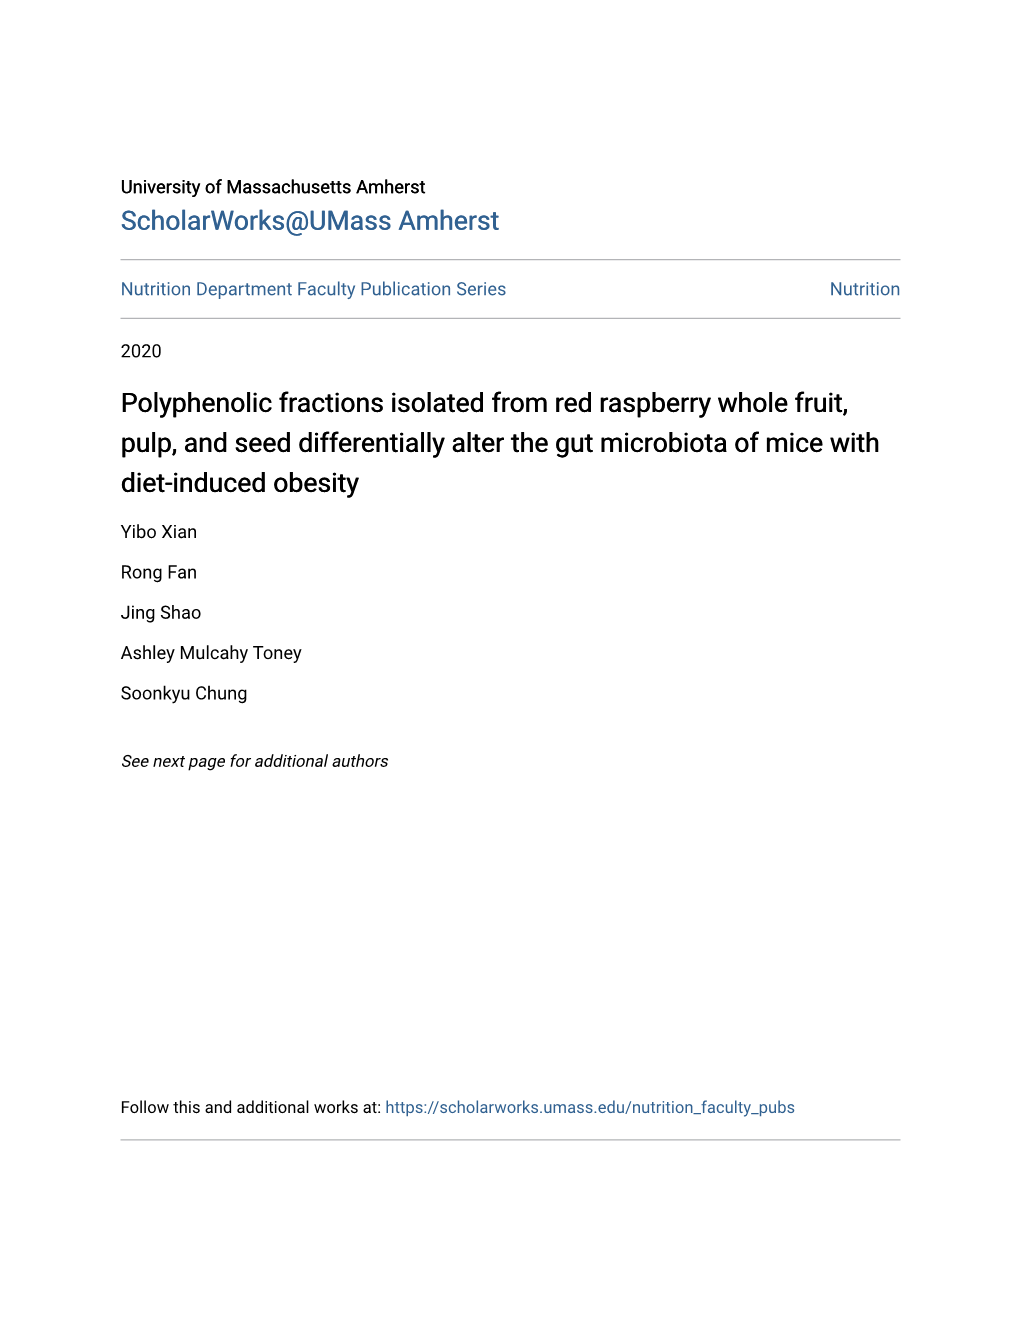 Polyphenolic Fractions Isolated from Red Raspberry Whole Fruit, Pulp, and Seed Differentially Alter the Gut Microbiota of Mice with Diet-Induced Obesity